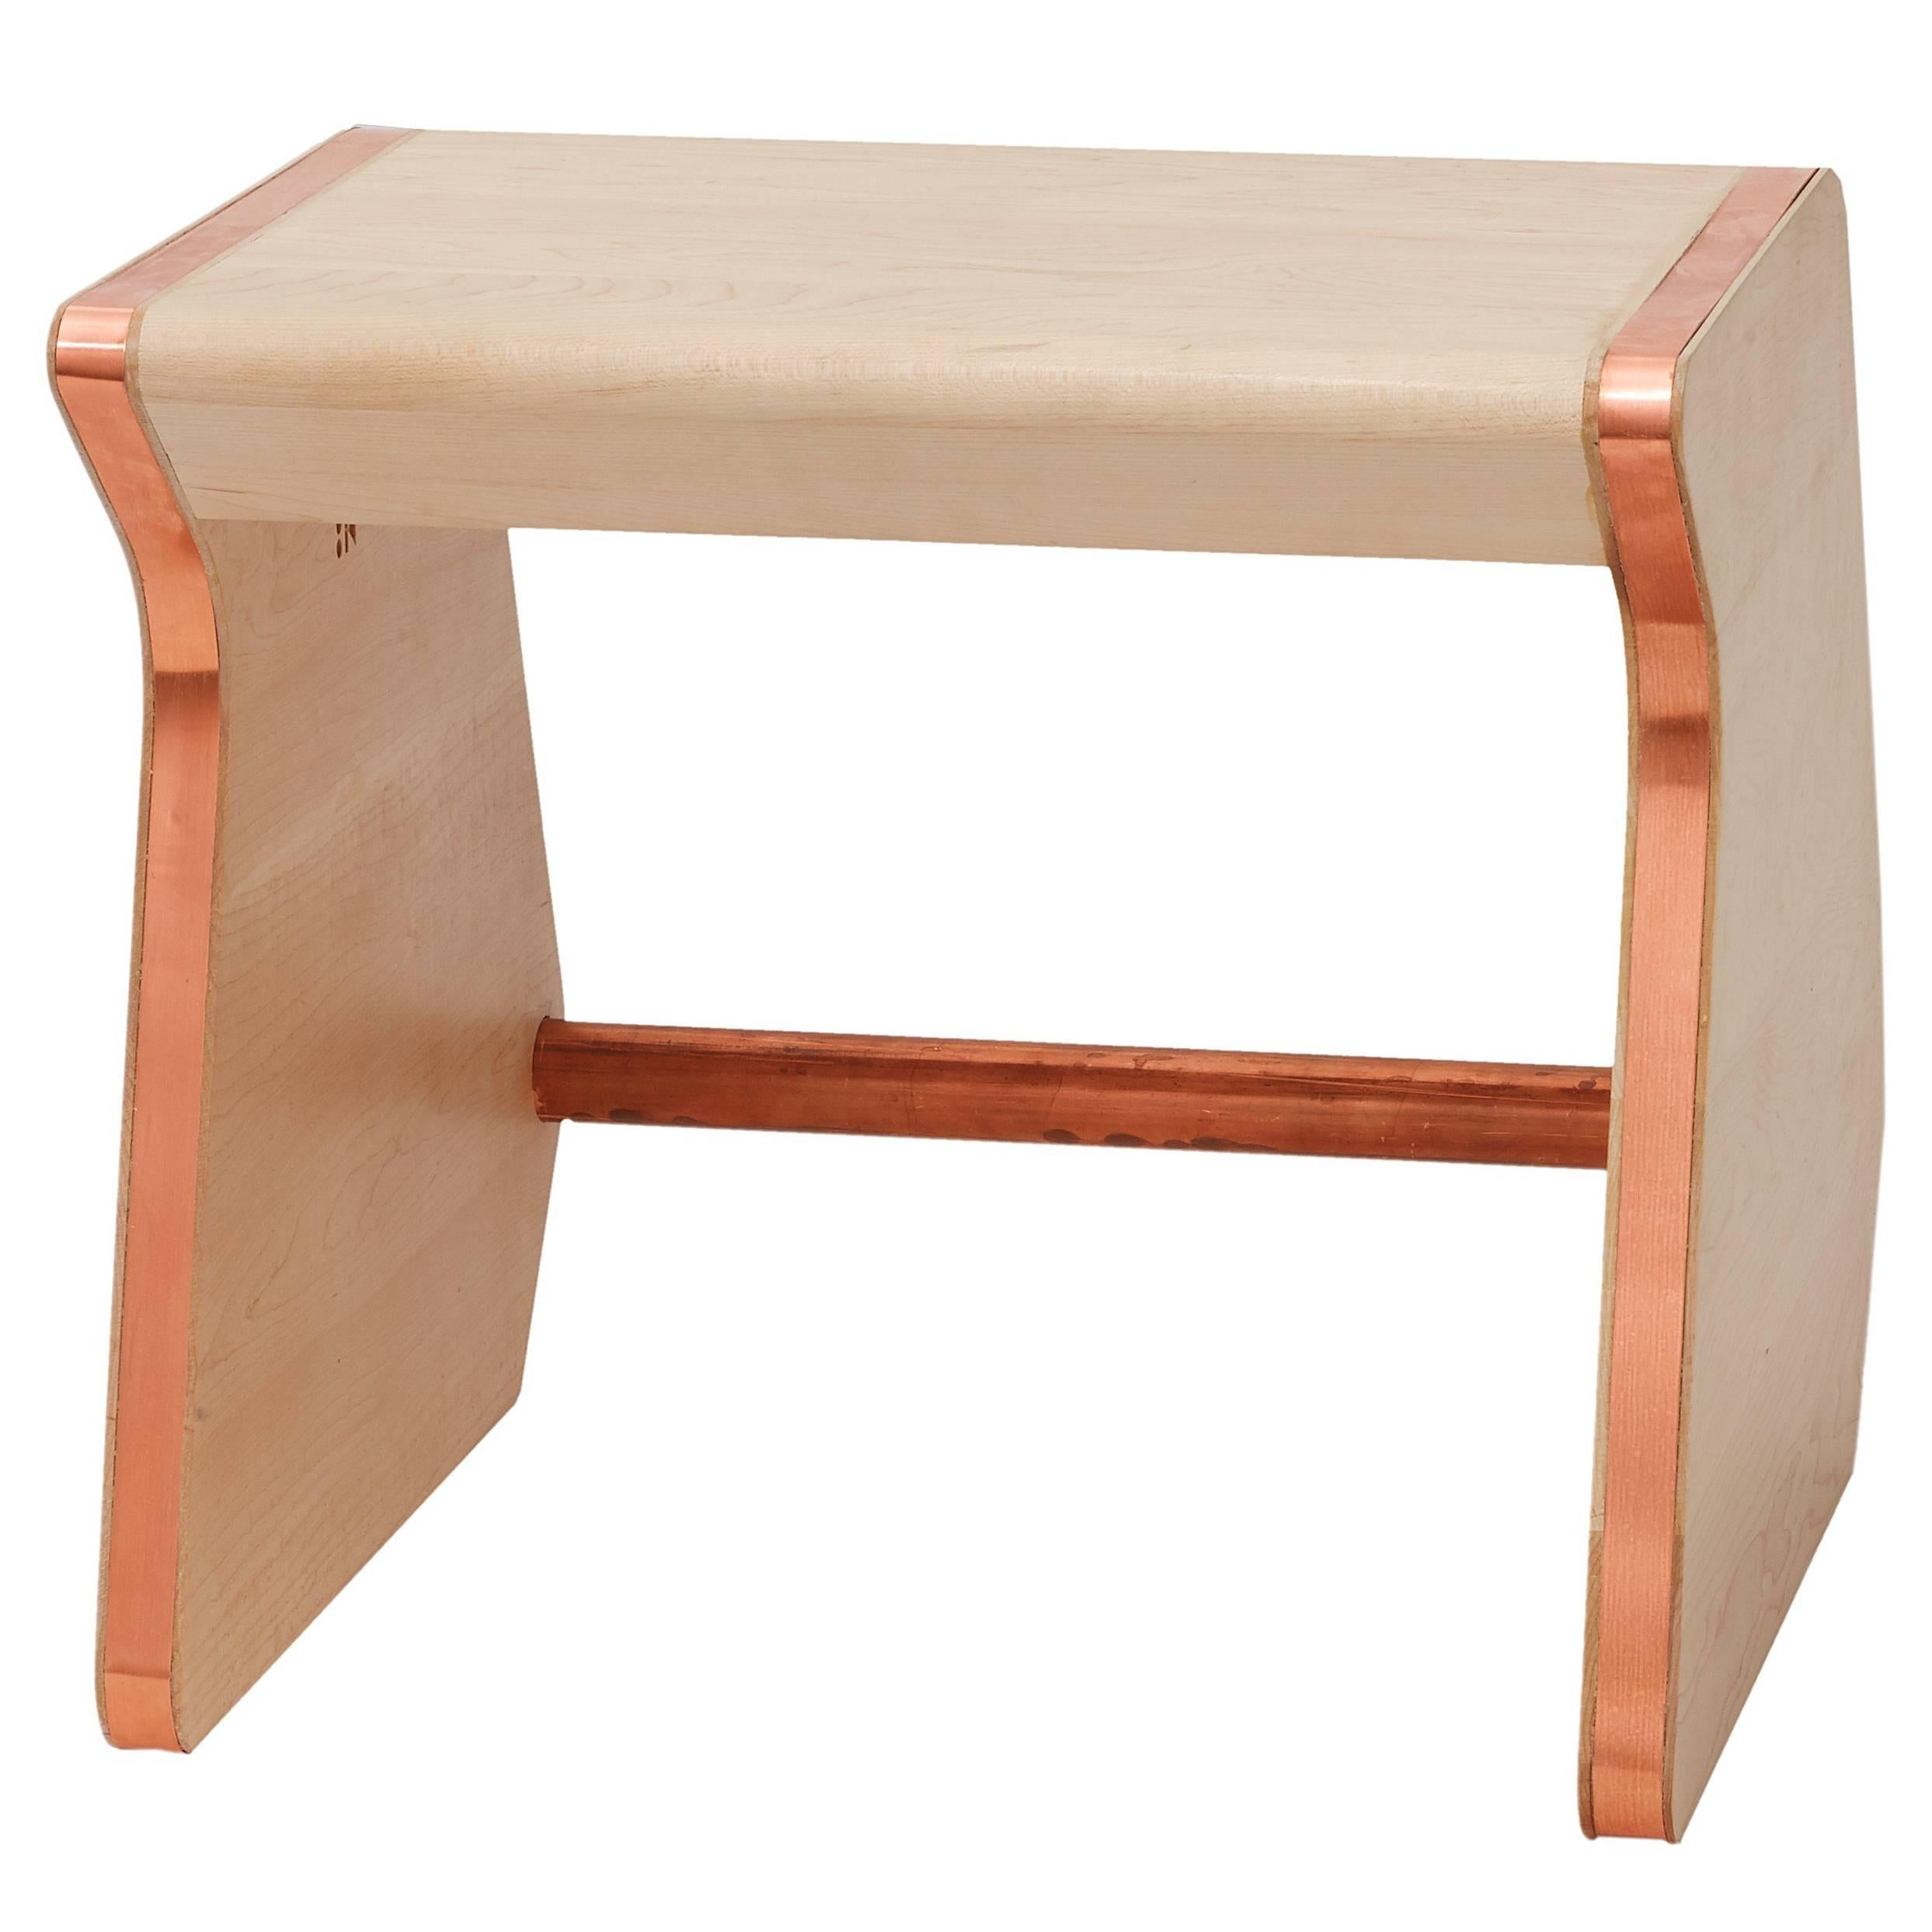 'Perch' Child Chair from the Heritage Collection by Studiokinder in Maple/Copper For Sale